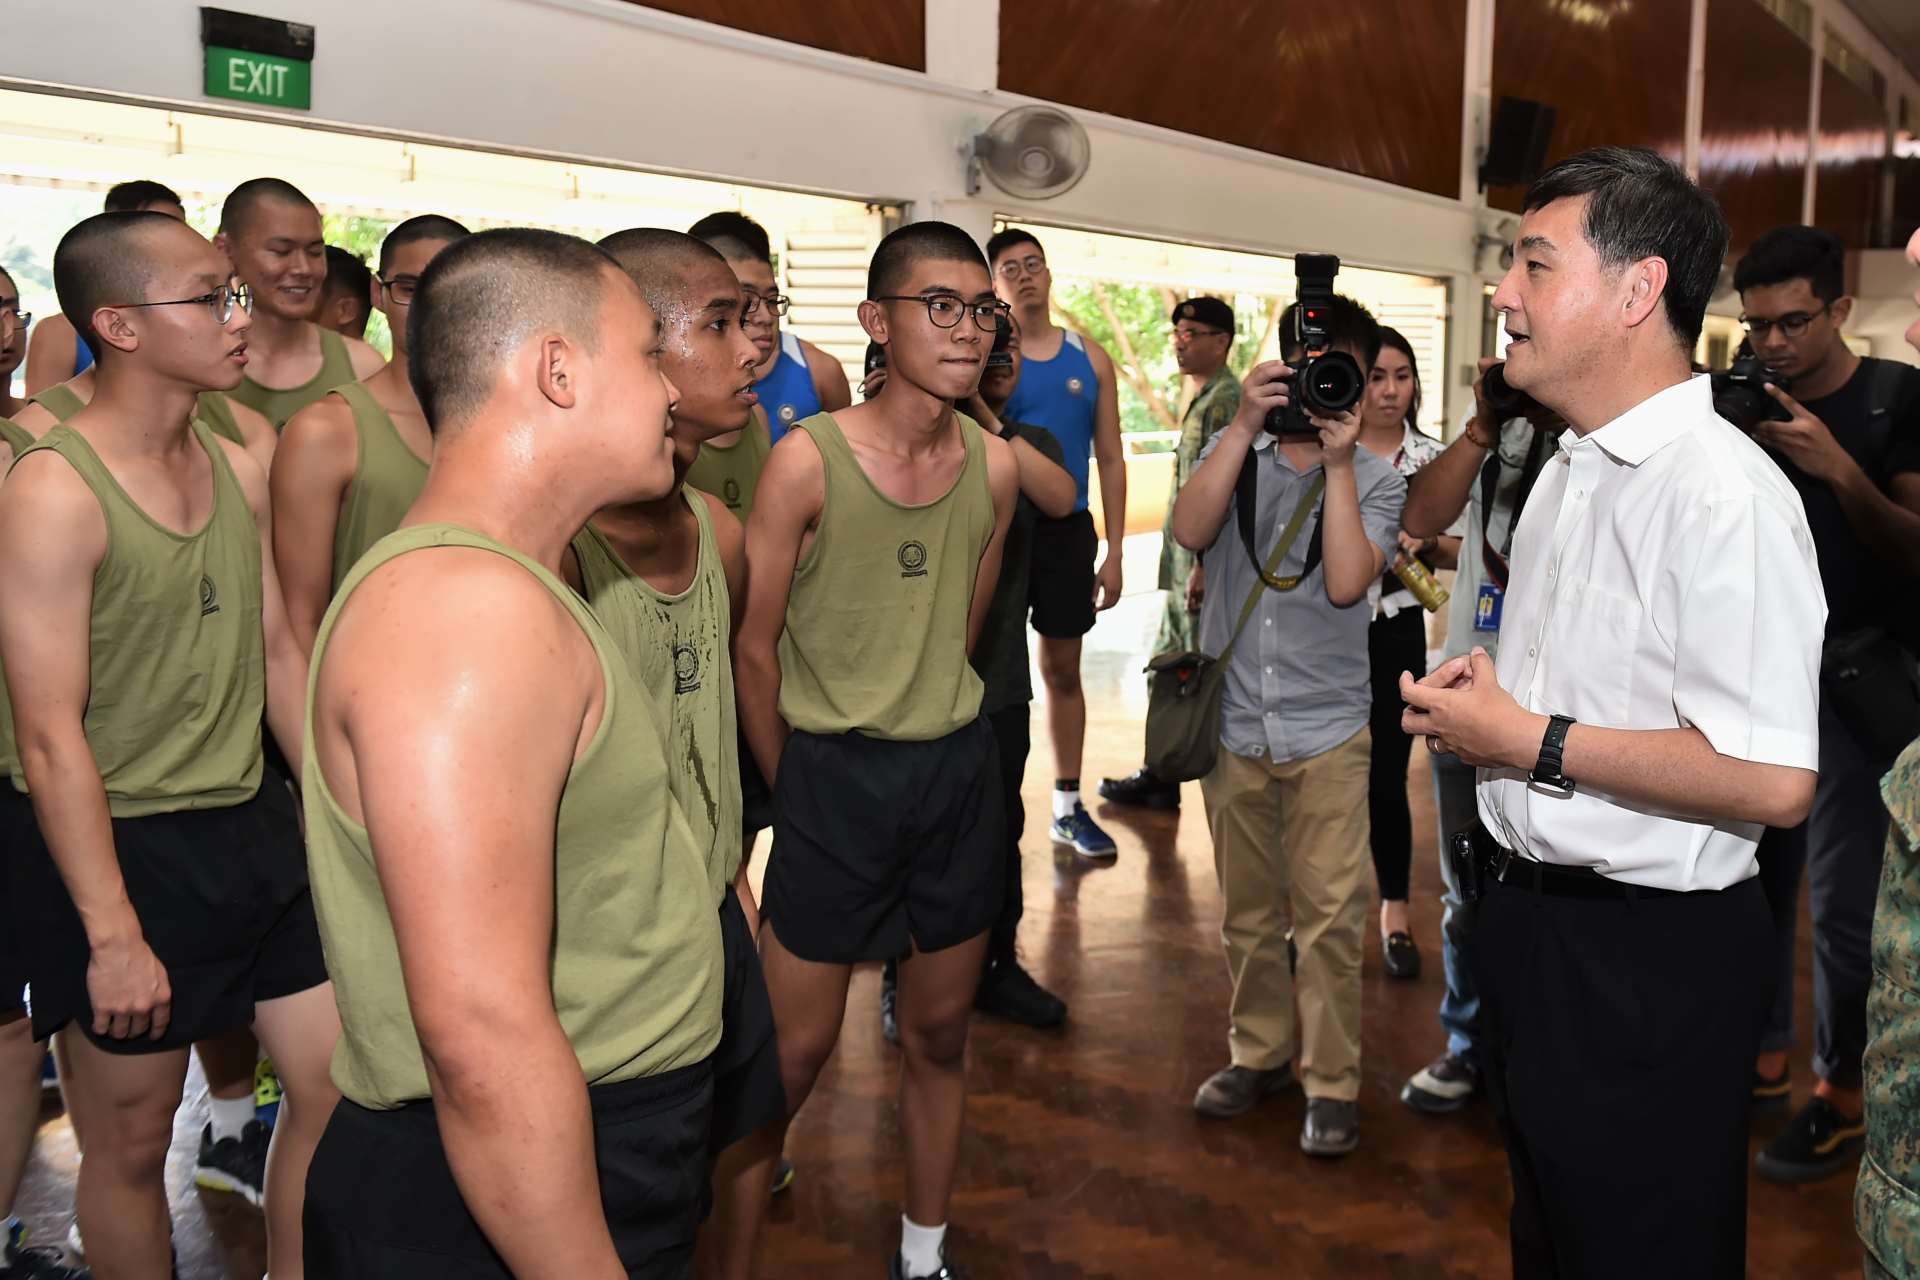 Senior Minister of State for Defence Mr Heng Chee How interacting with service-fit recruits during his visit to BMTC School V.